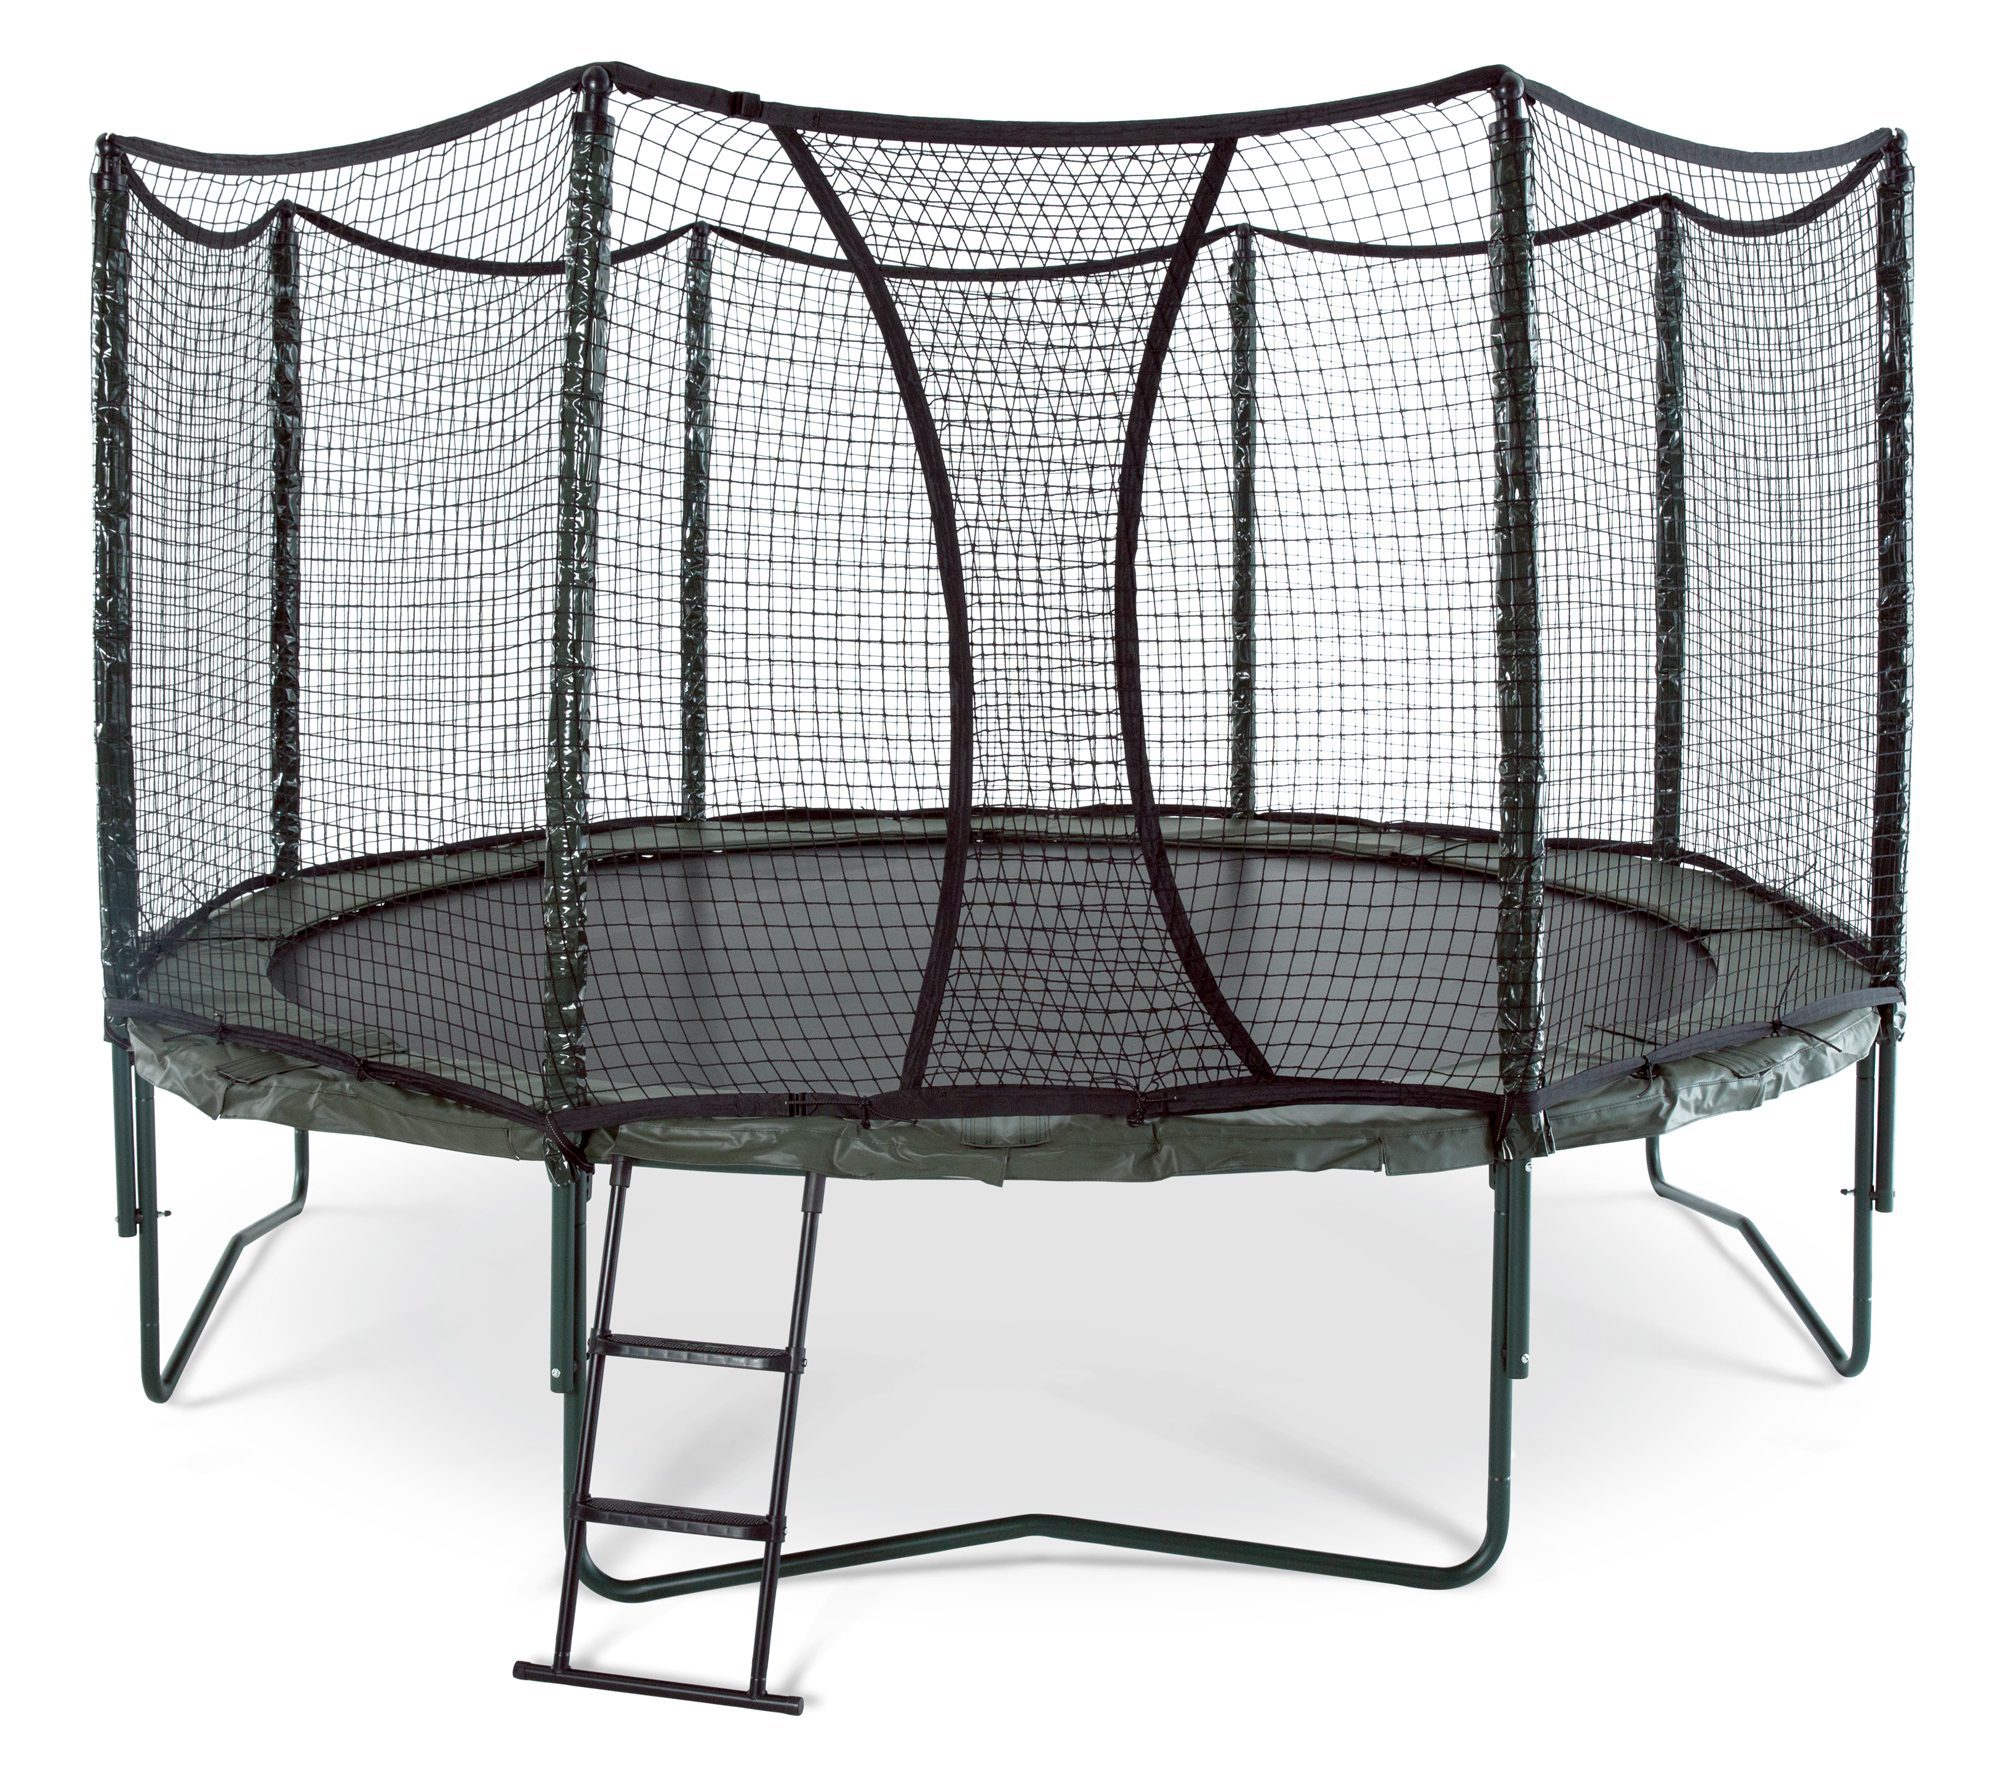 Derved Kritik nød Alleyoop 14' Variable Bounce Trampoline with Power Bounce